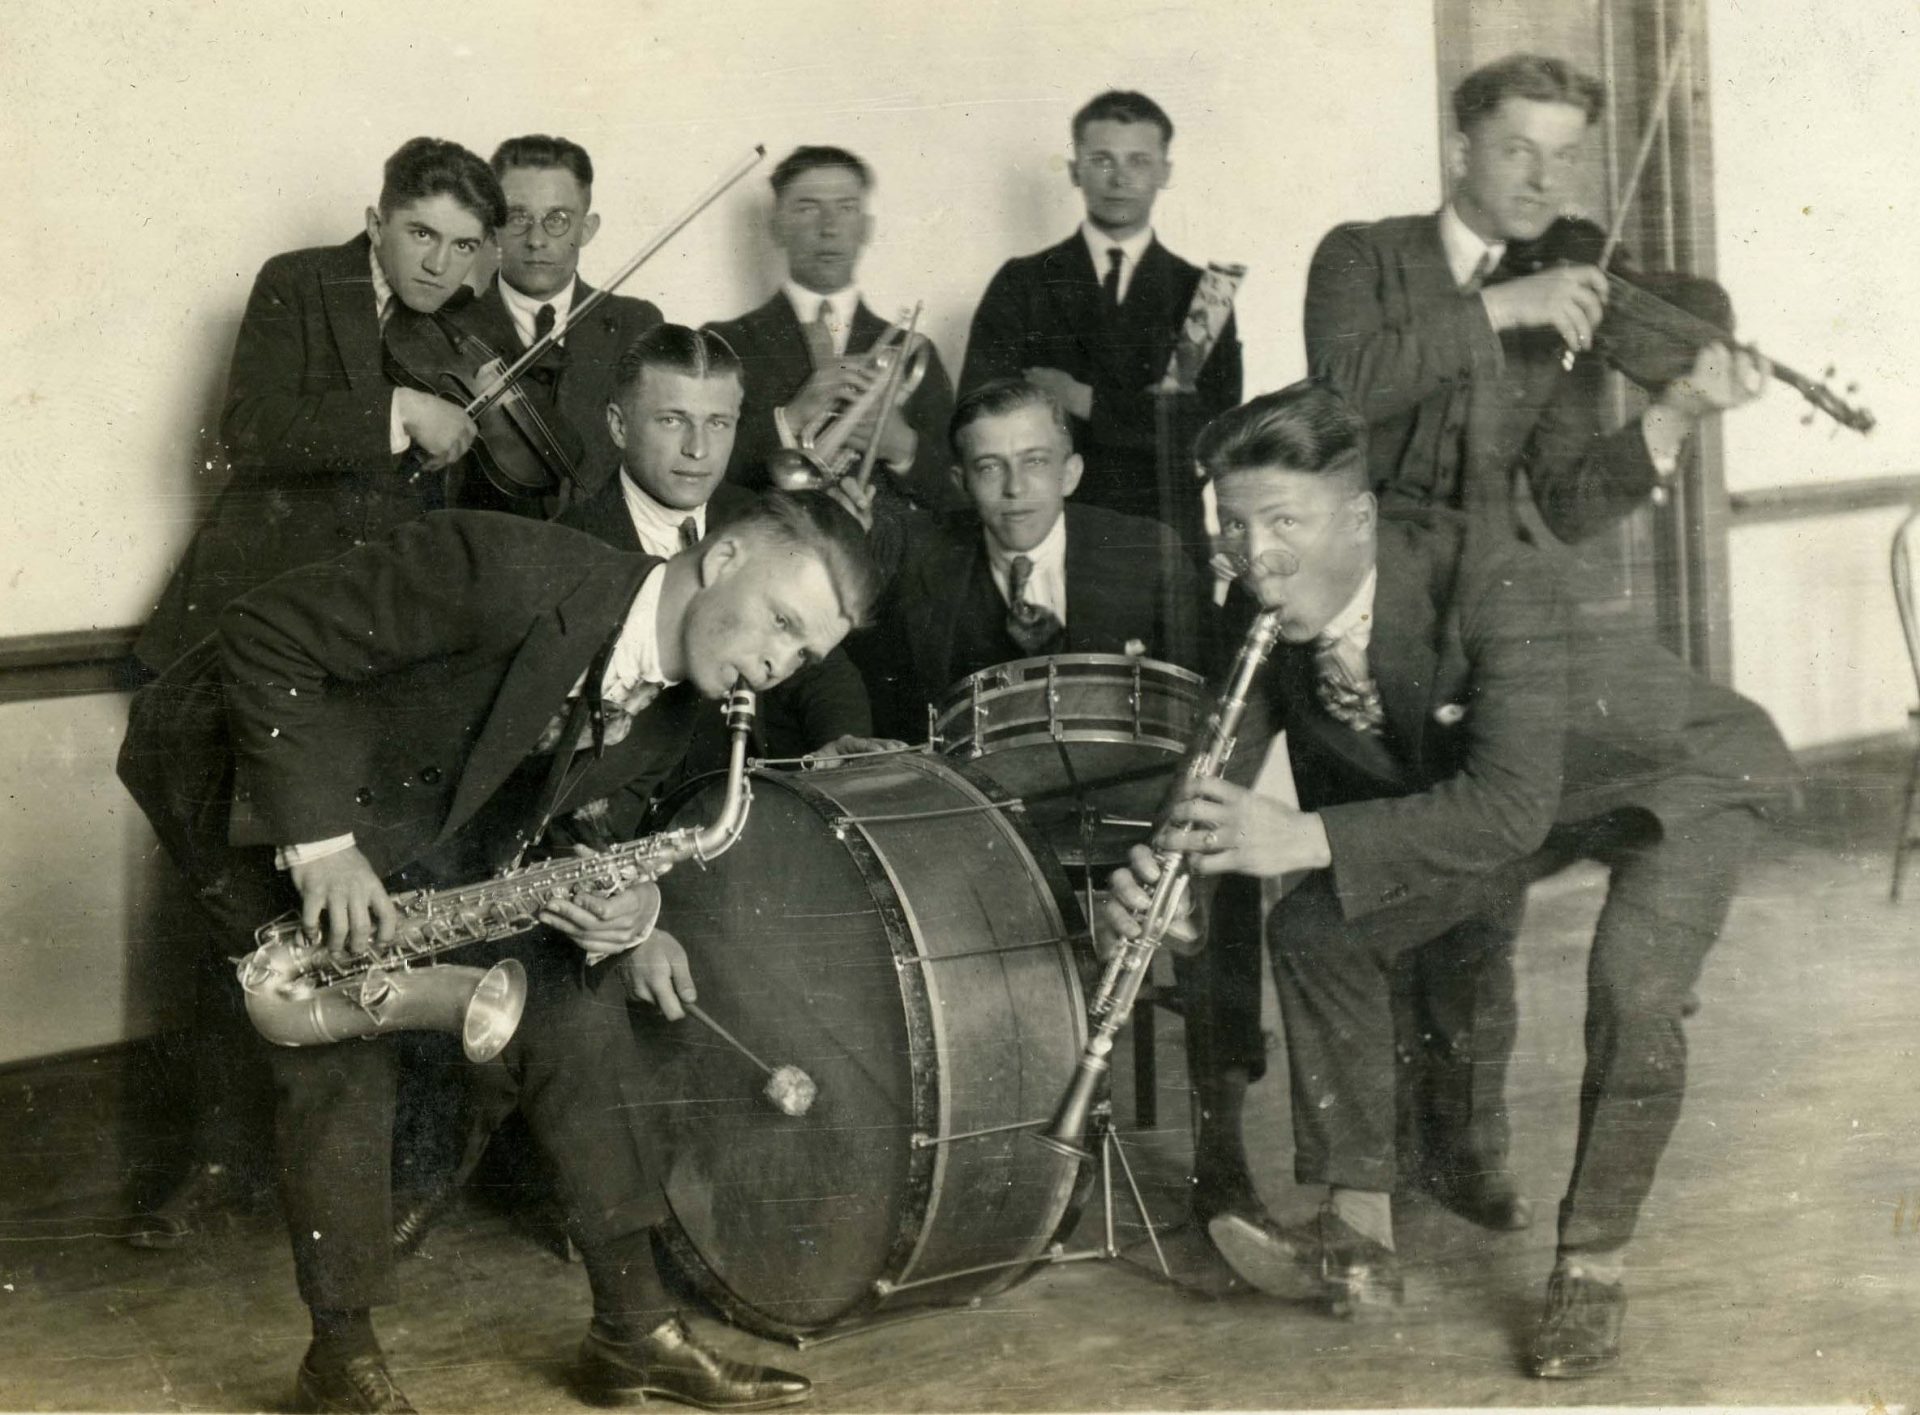 Historic black and white photo of a small band from the early days of St. Procopius; Online resources